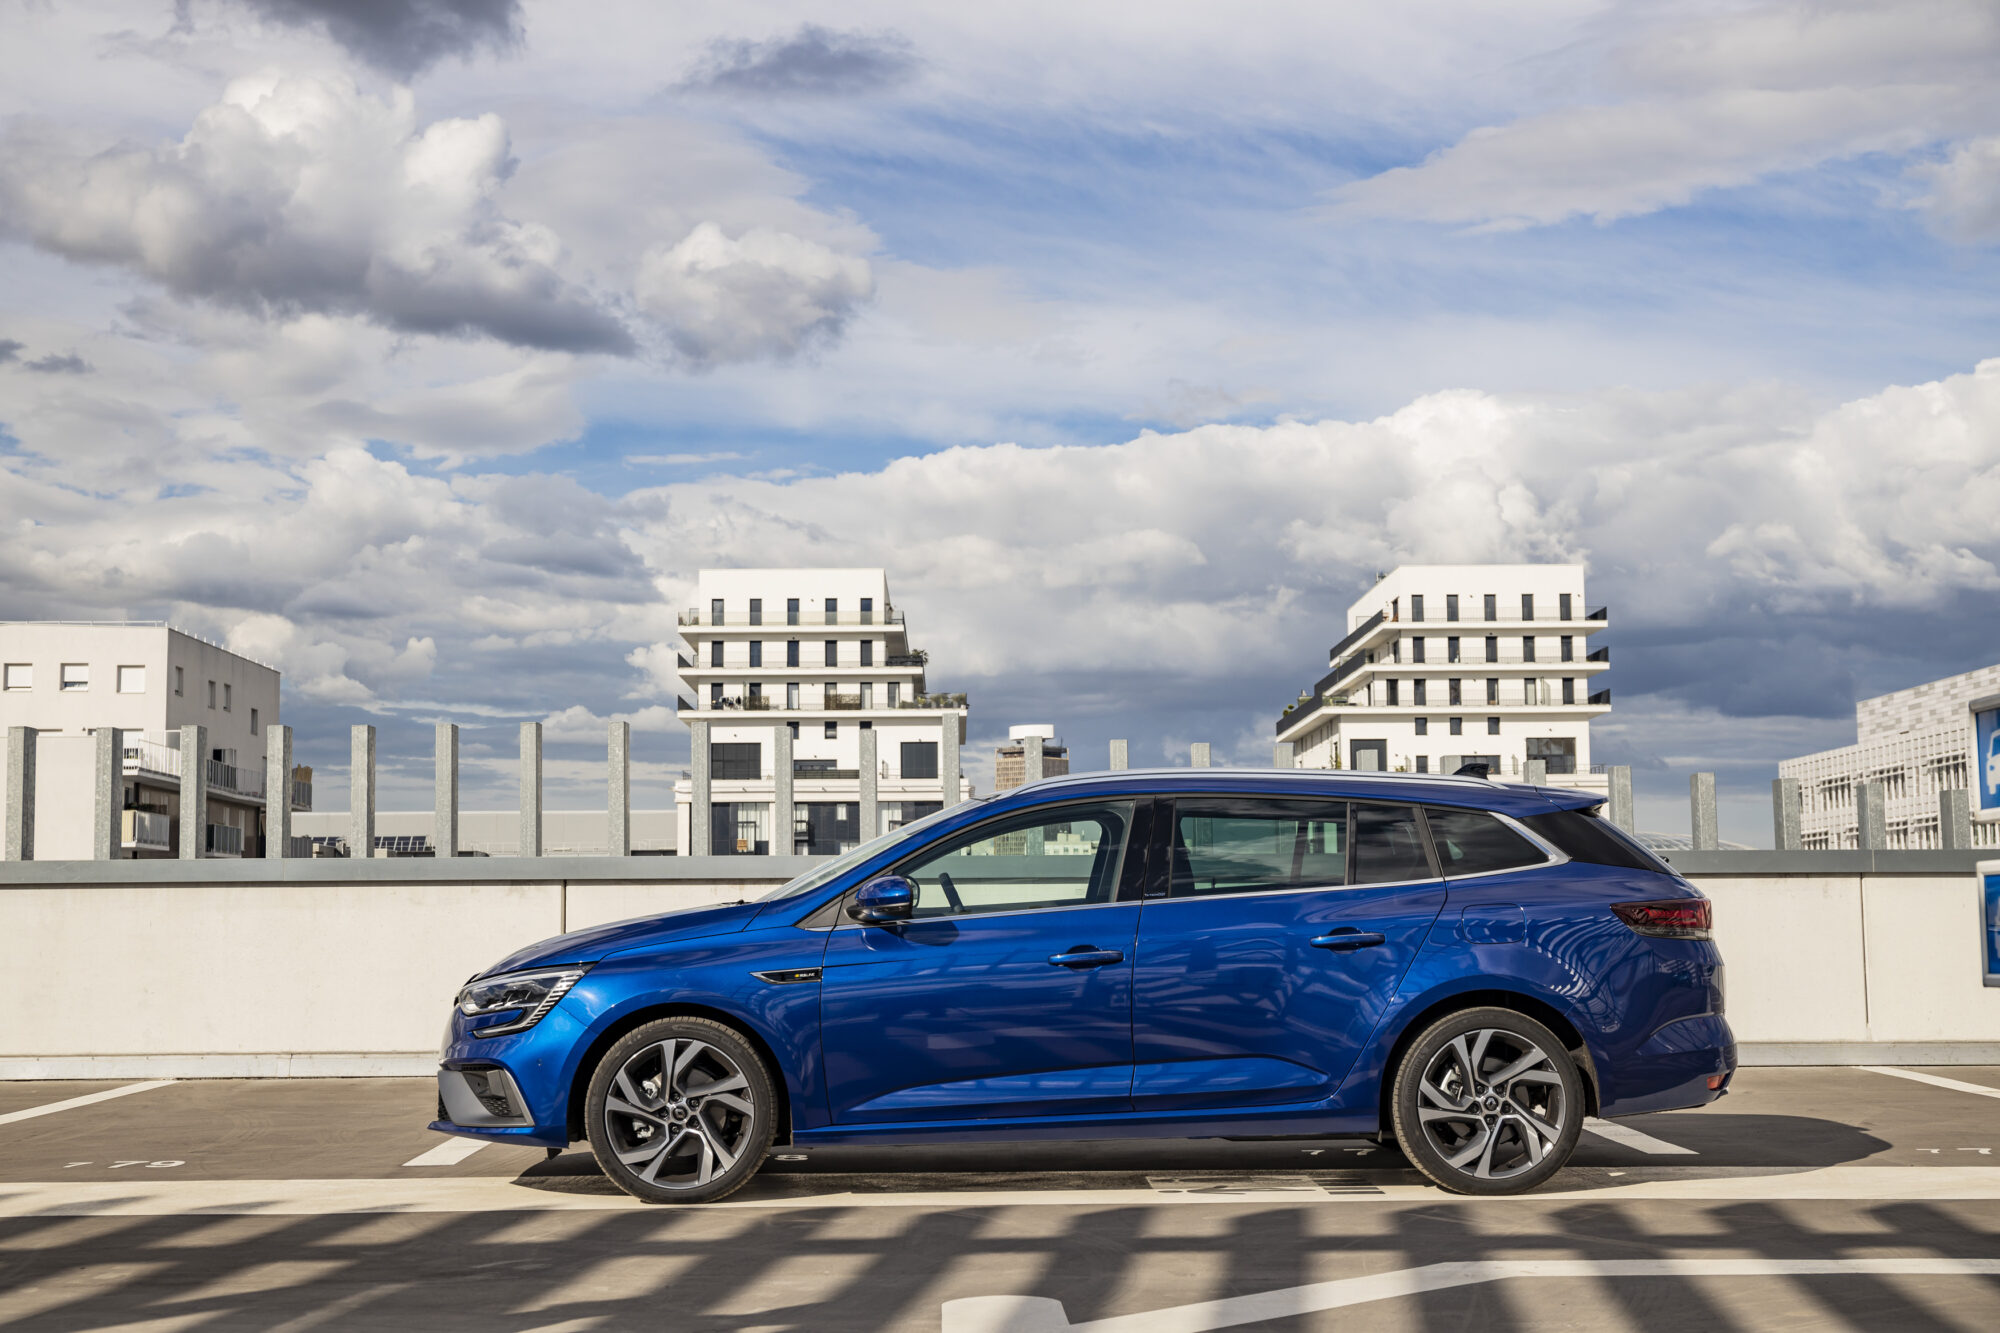 2020 - New Renault MEGANE E-TECH Plug-in tests drive